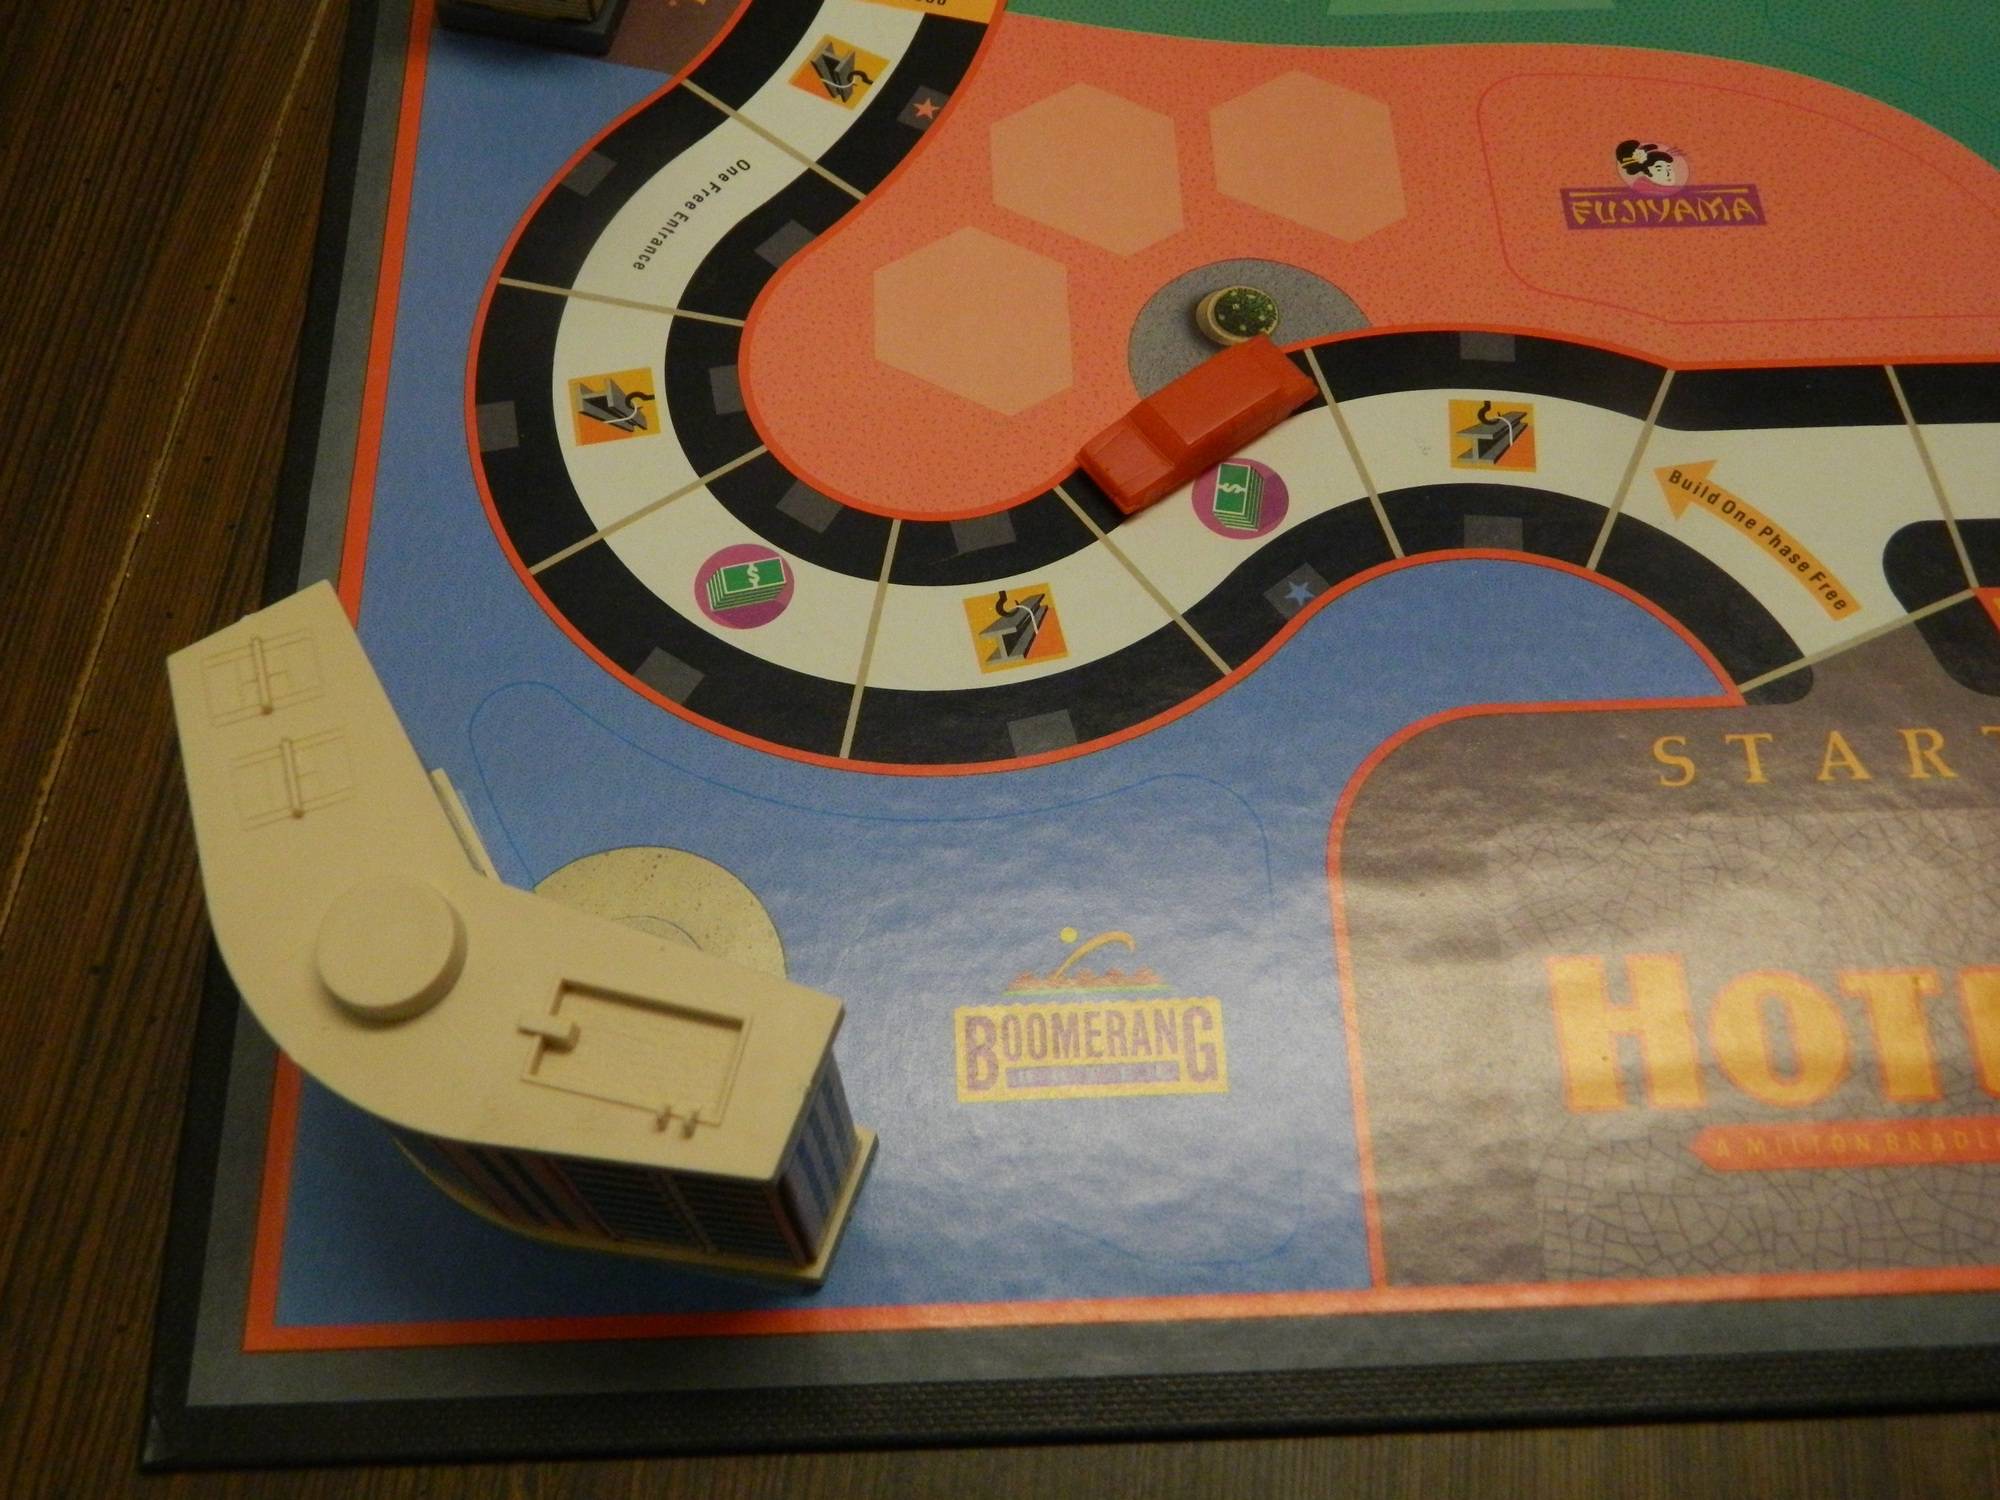 Hotels AKA Hotel Tycoon Board Game Review and Rules - Geeky Hobbies